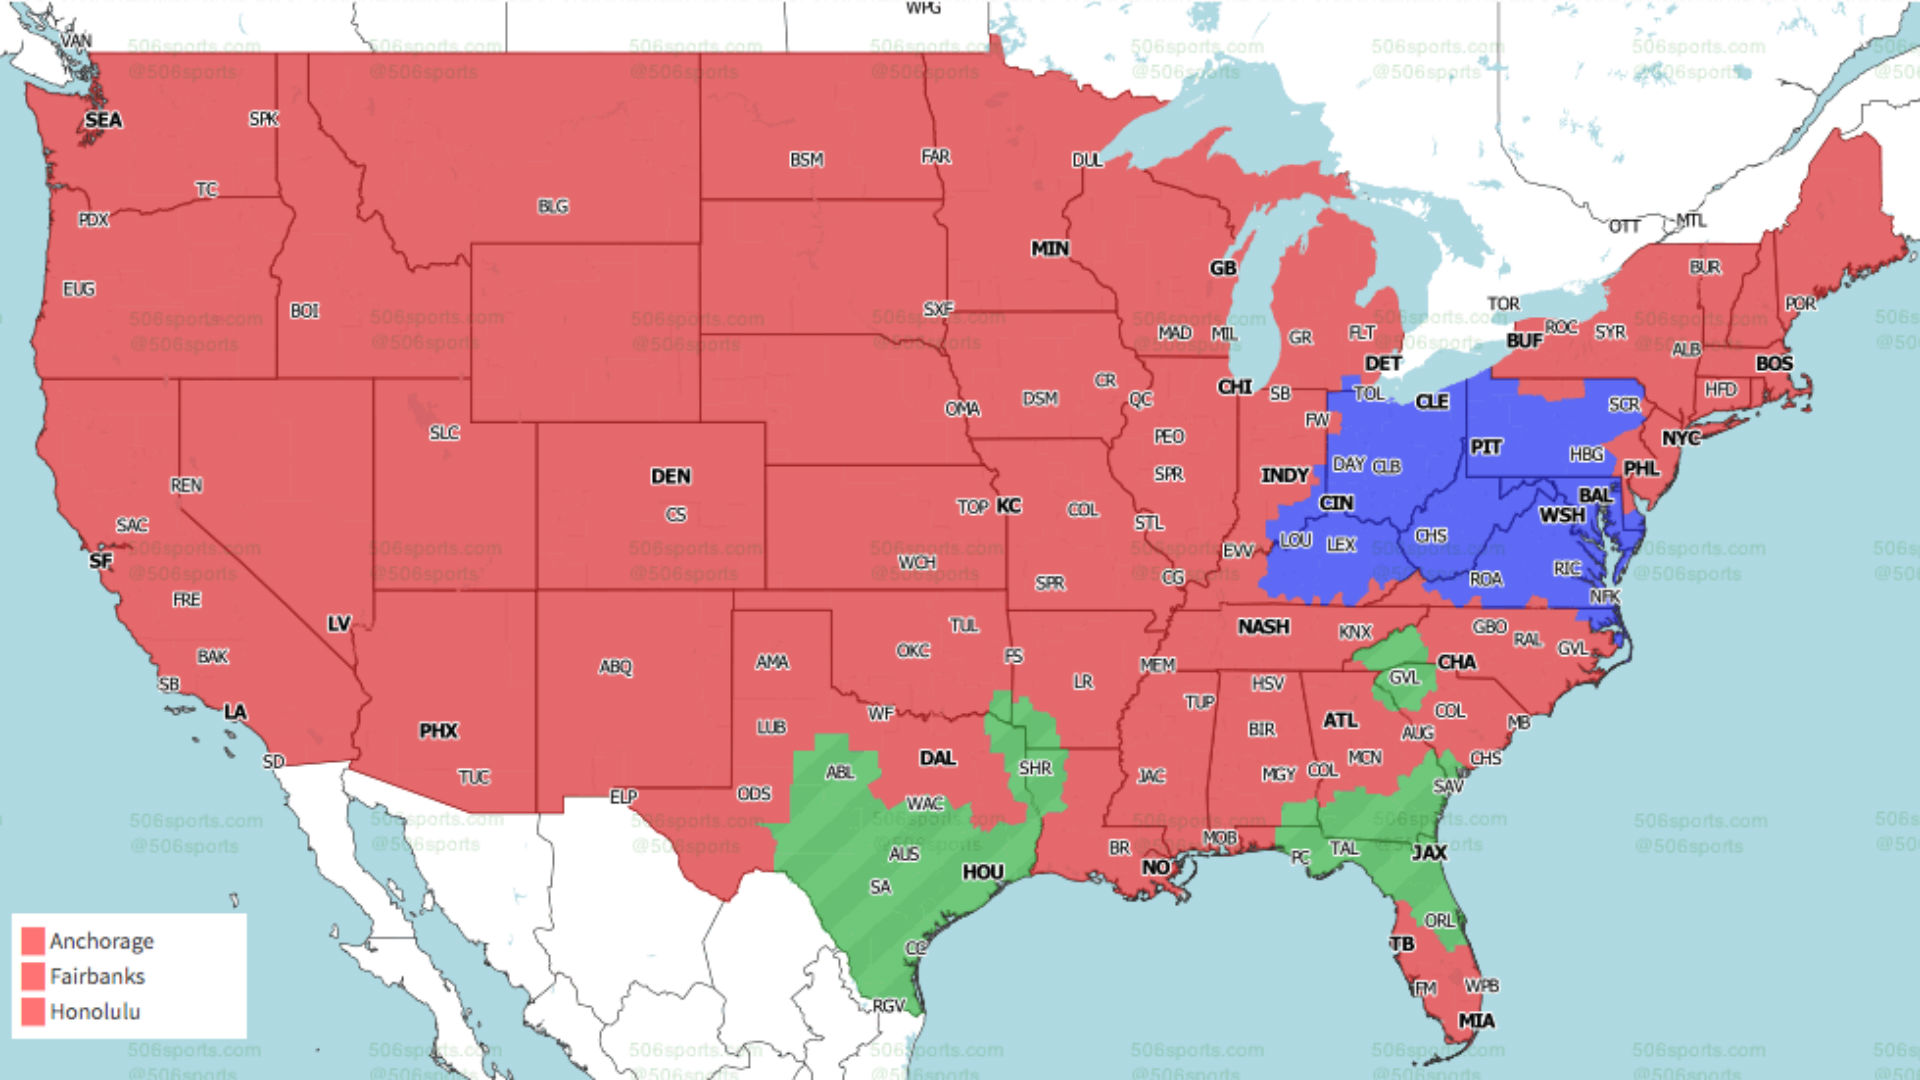 NFL Week 5 coverage map: TV schedule for CBS, Fox regional broadcasts